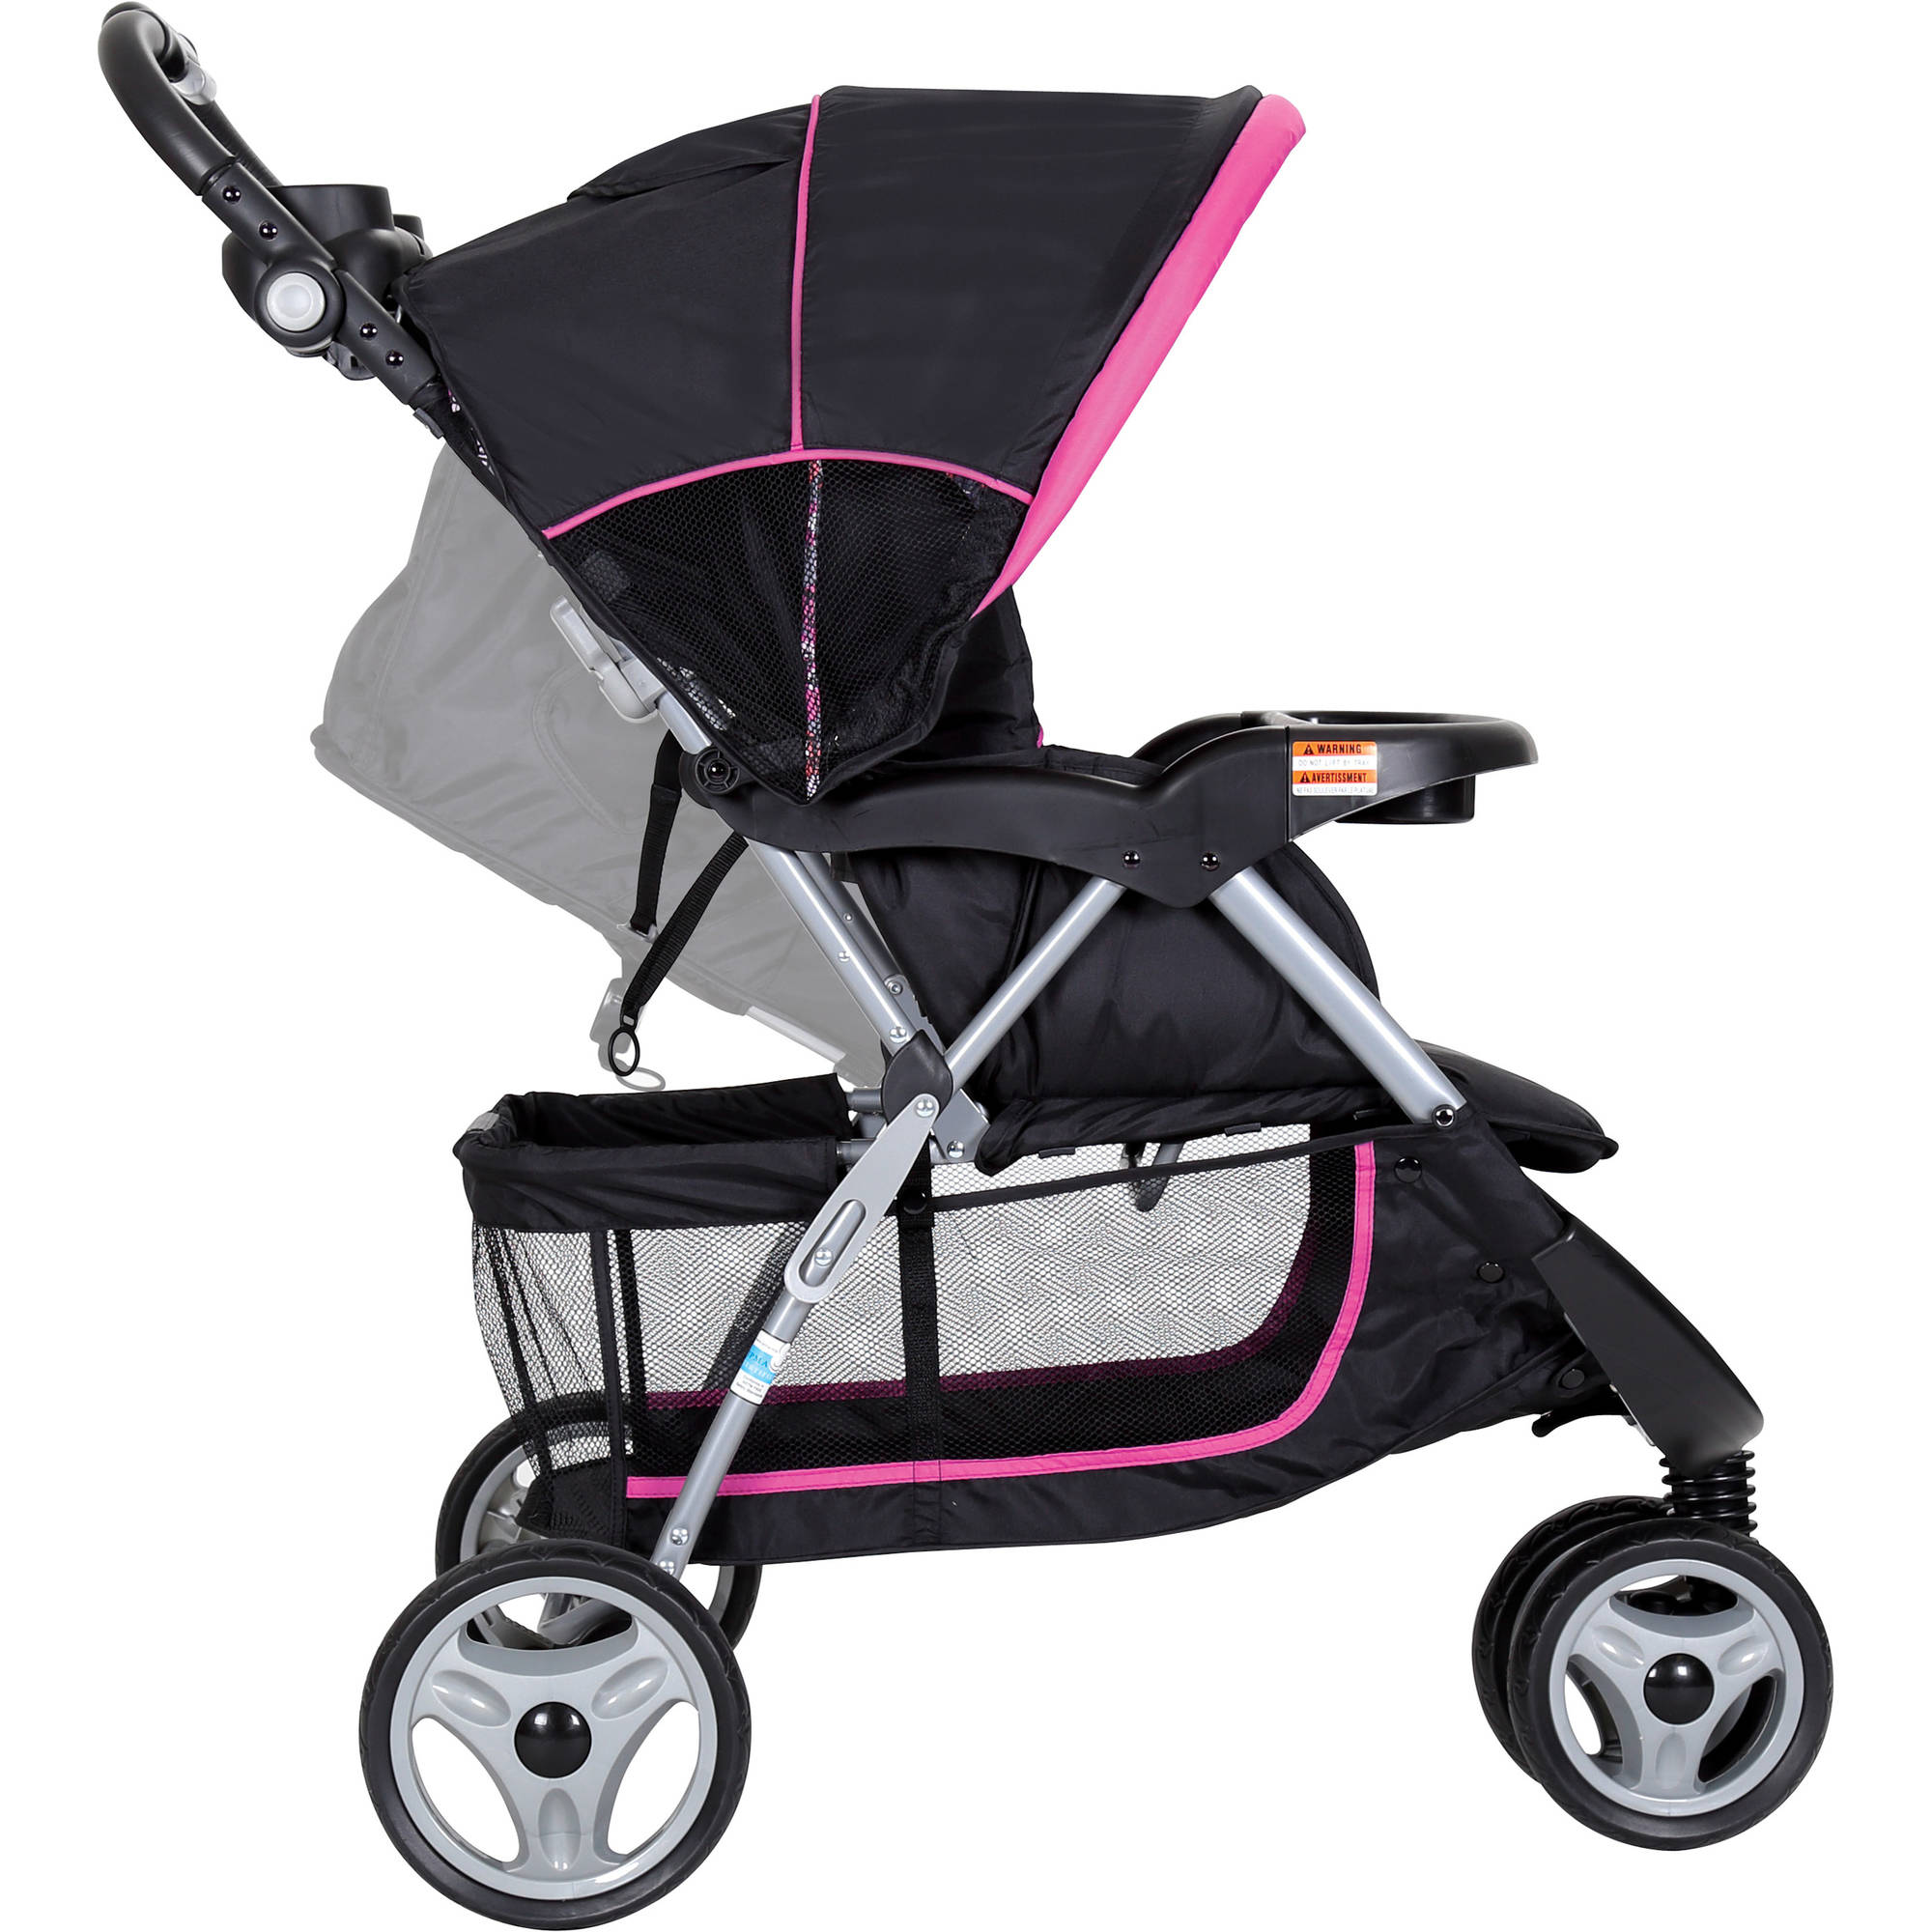 Baby Trend EZ Ride 5 Travel System, Floral Garden Pink - image 3 of 5